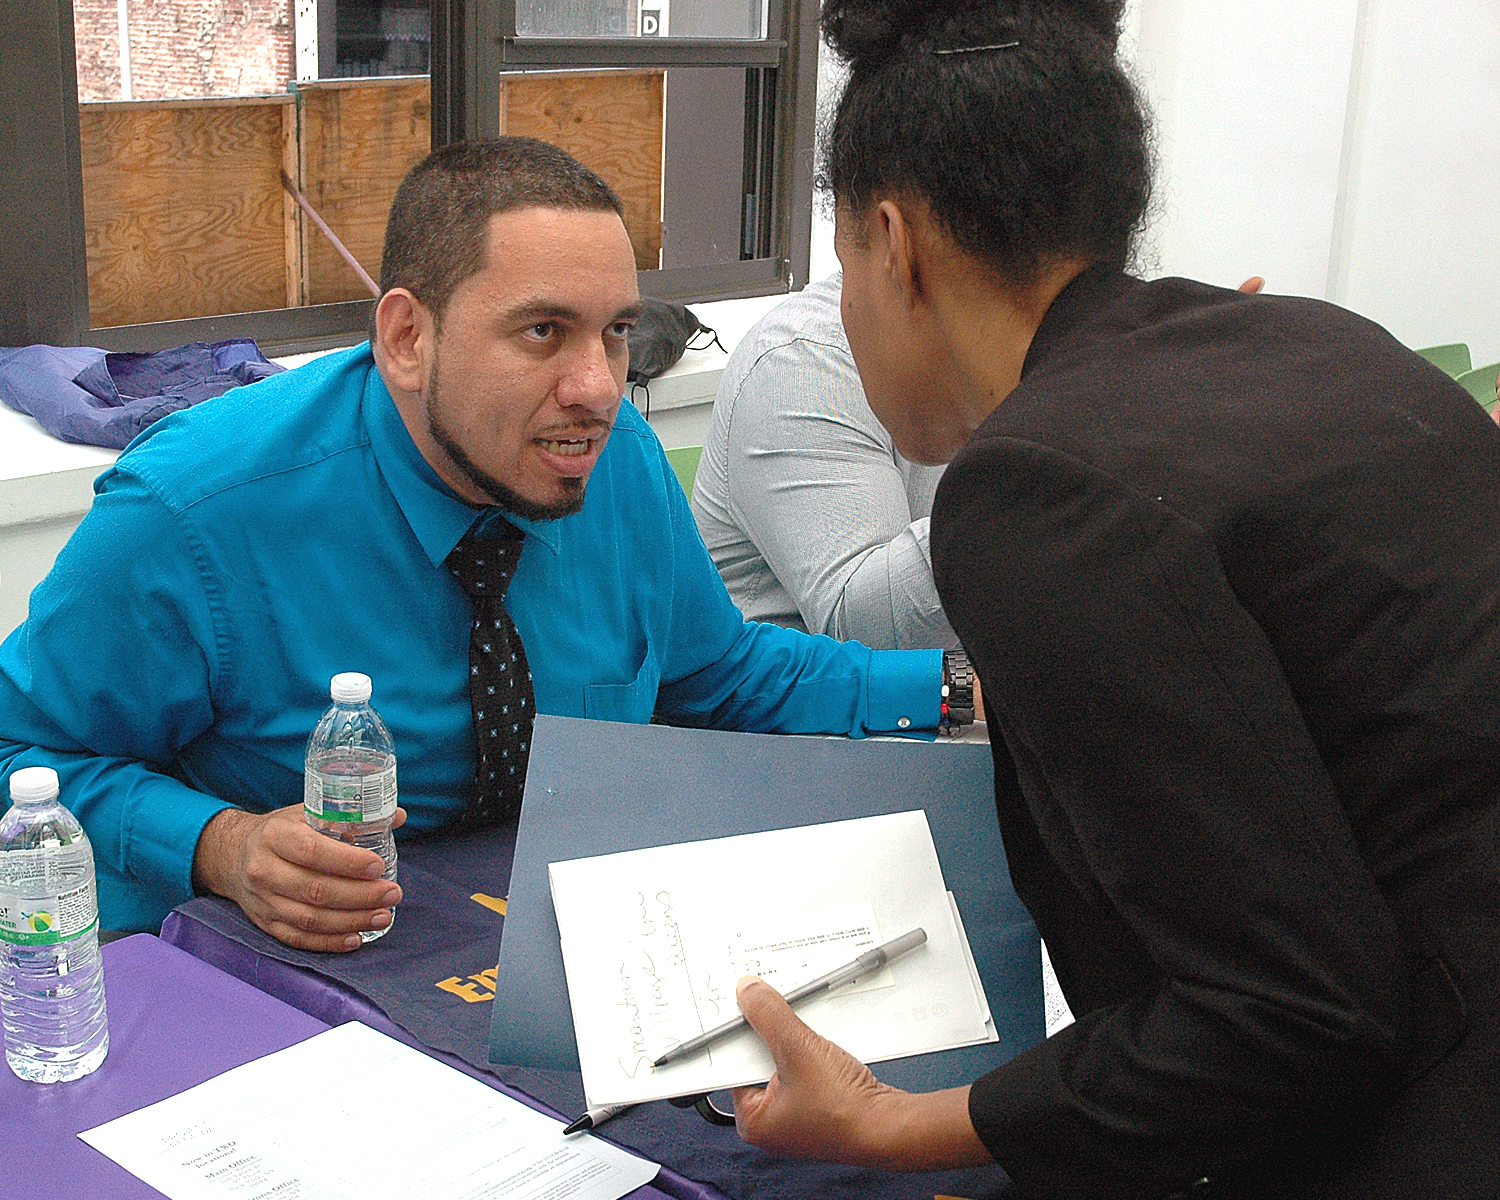 One of the job fair interviewers…with one attendee